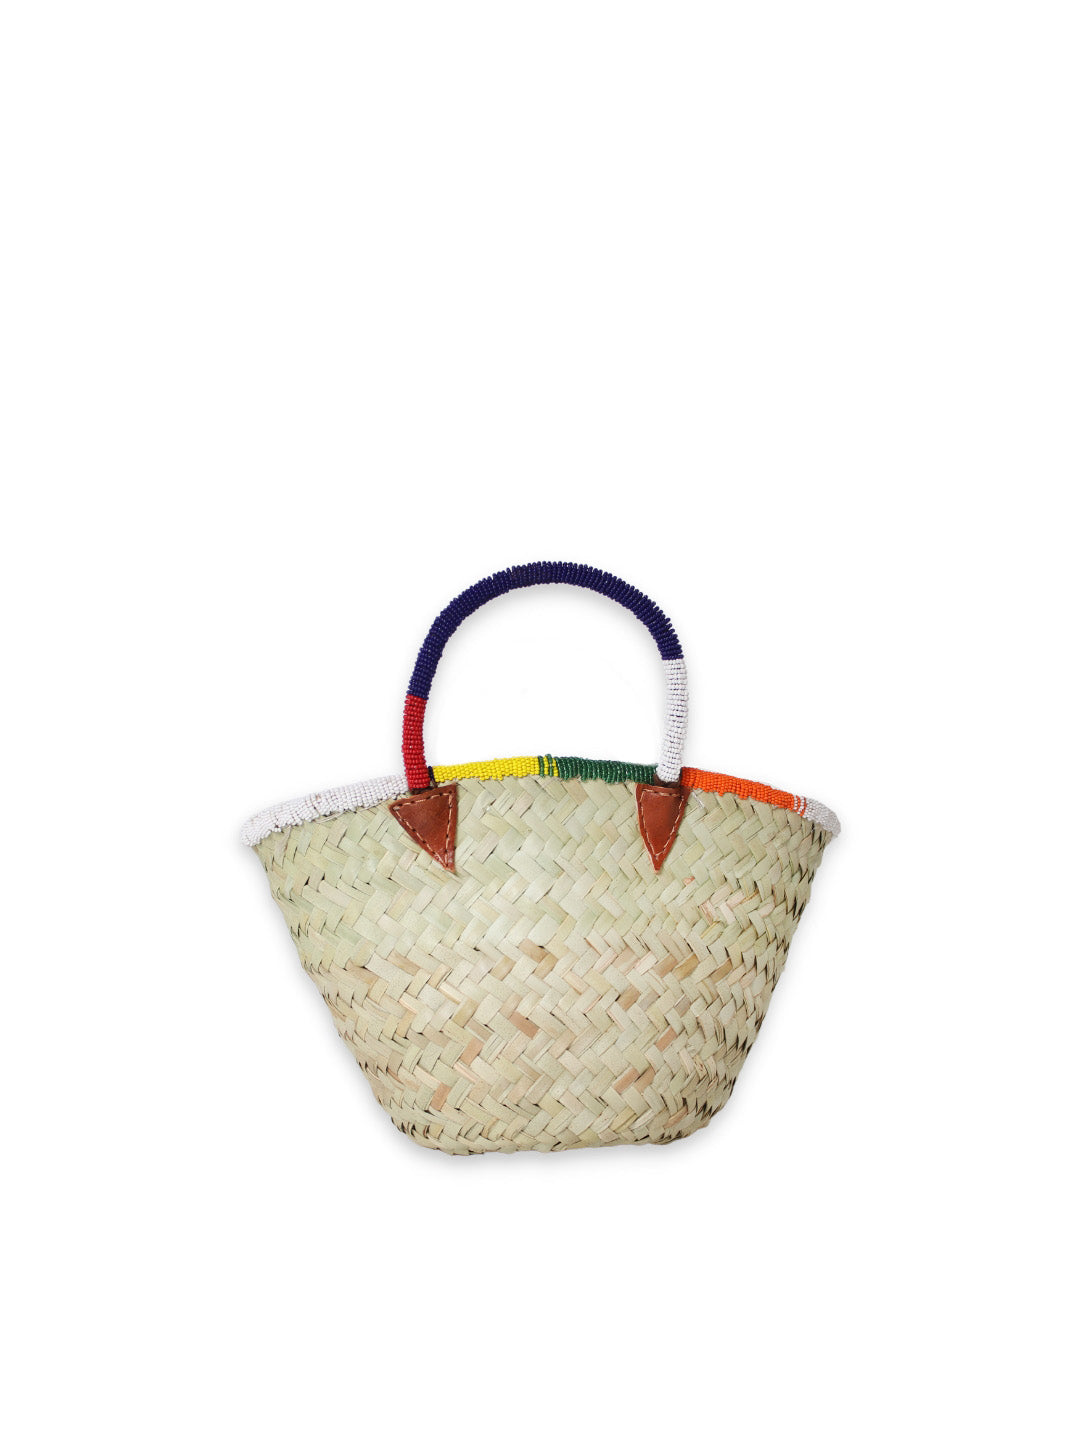 Classic hand-woven straw bags are as romantic as they are functional. With a roomy interior to easily hold all your essentials it brings resort vibes to any look during the summer. A fun touch with colorful beads makes it an instant favorite for warm beach days. Beaded basket, bag, summer basket, beach bag, fatto a mano, moda etica, borsa da spiaggia, cesta